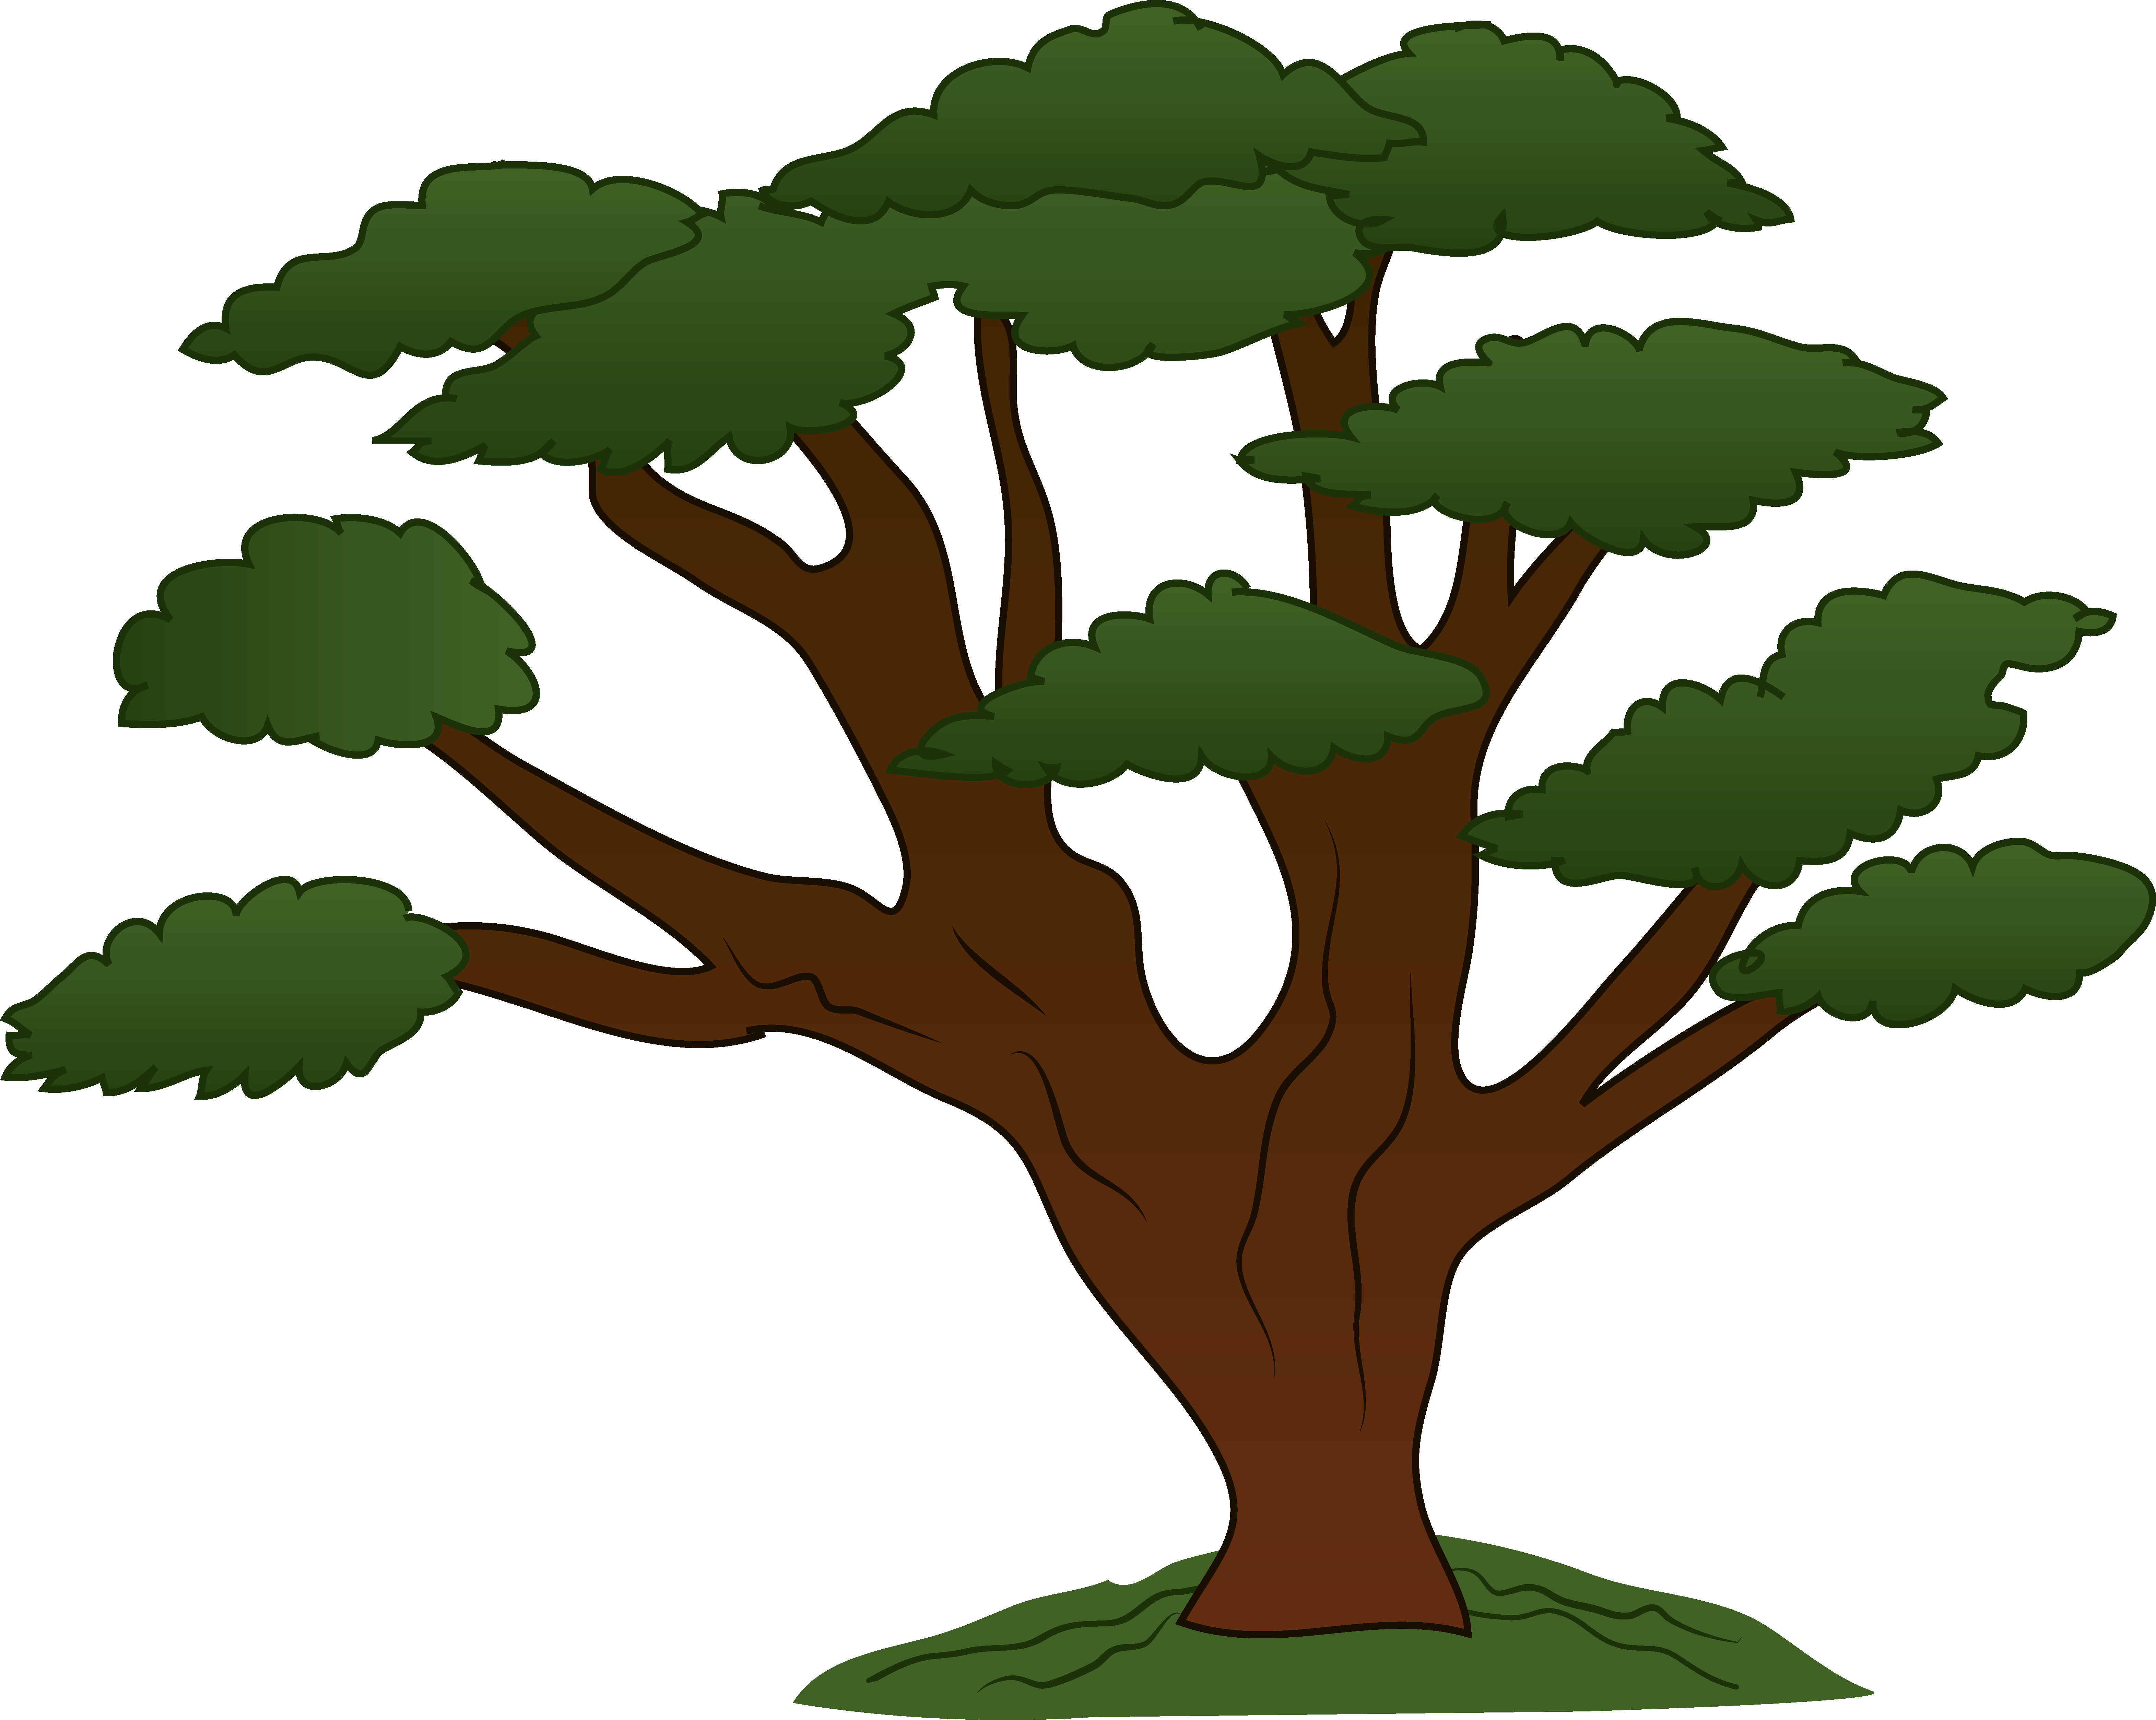 Cycle clipart tree growth. Of life sweeping oak